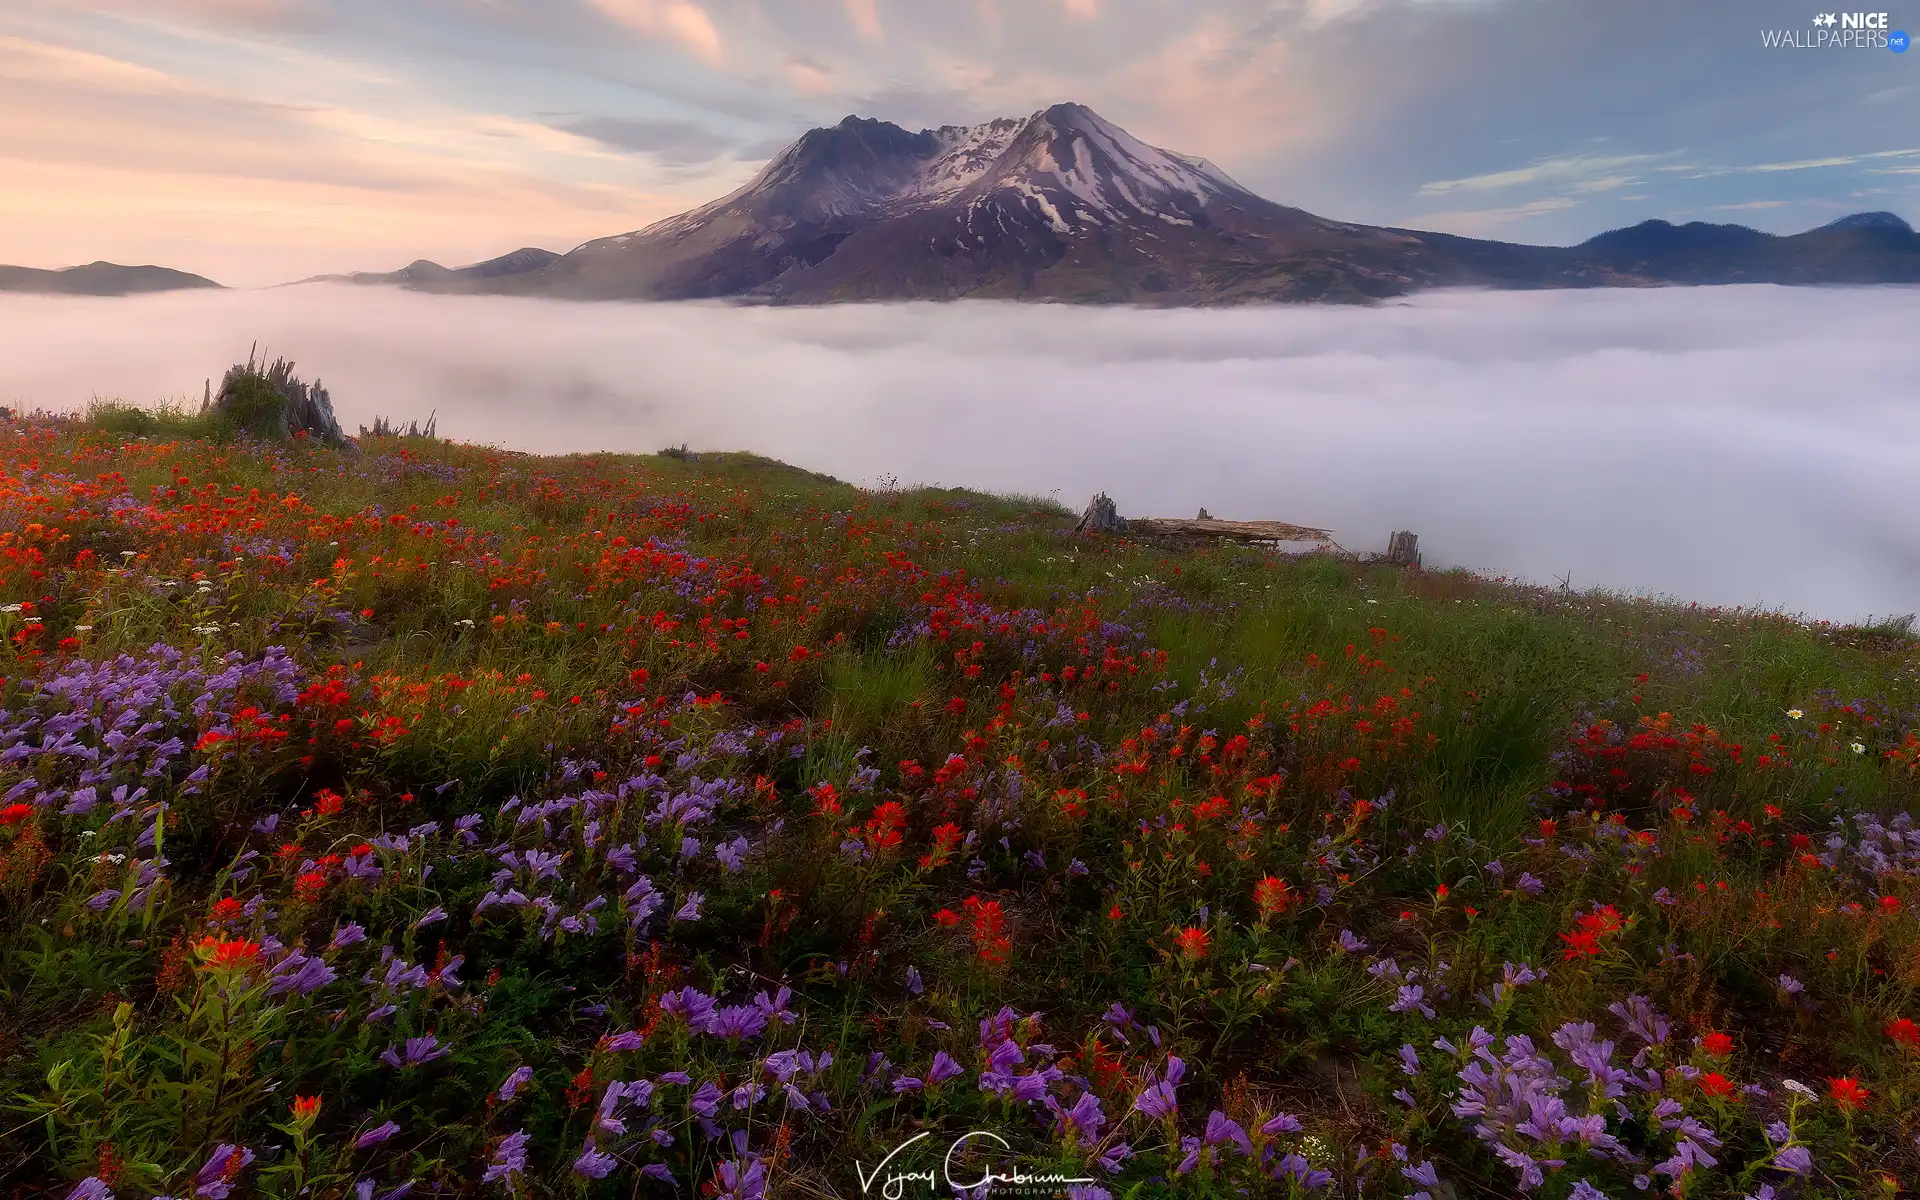 Volcano Mount St. Helens, Cascade Mountains, Meadow, Flowers, Washington State, The United States, Mountains, Fog, Indian Paintbrush